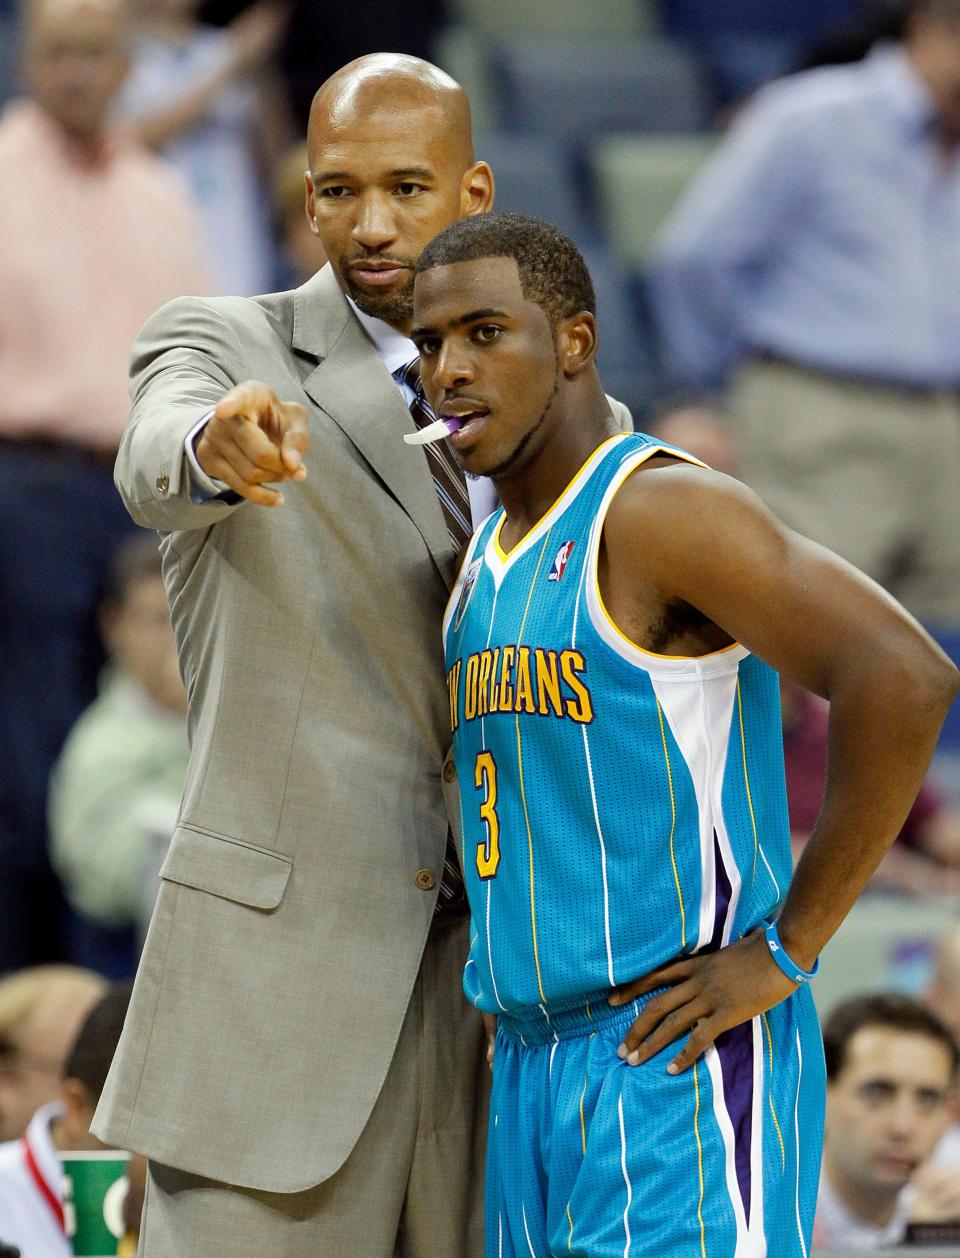 Monty Williams said he was forced to change his ways from the first time he coached Chris Paul in New Orleans.